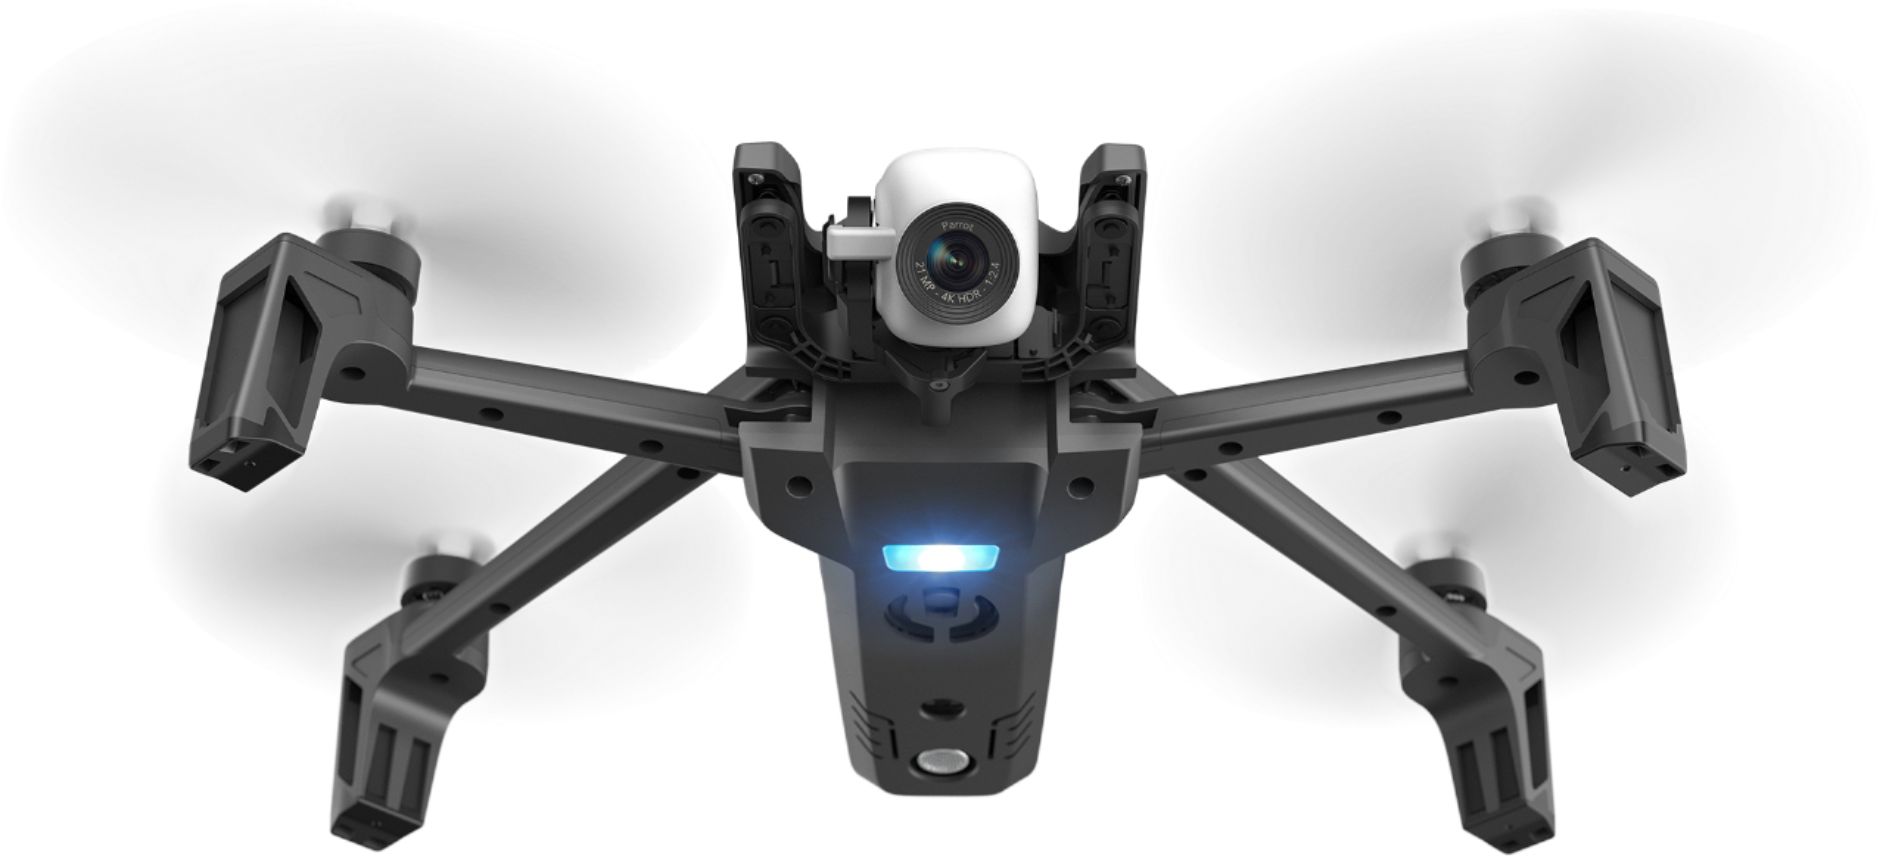 Best Buy: Parrot ANAFI 4K Quadcopter with Remote Controller Black